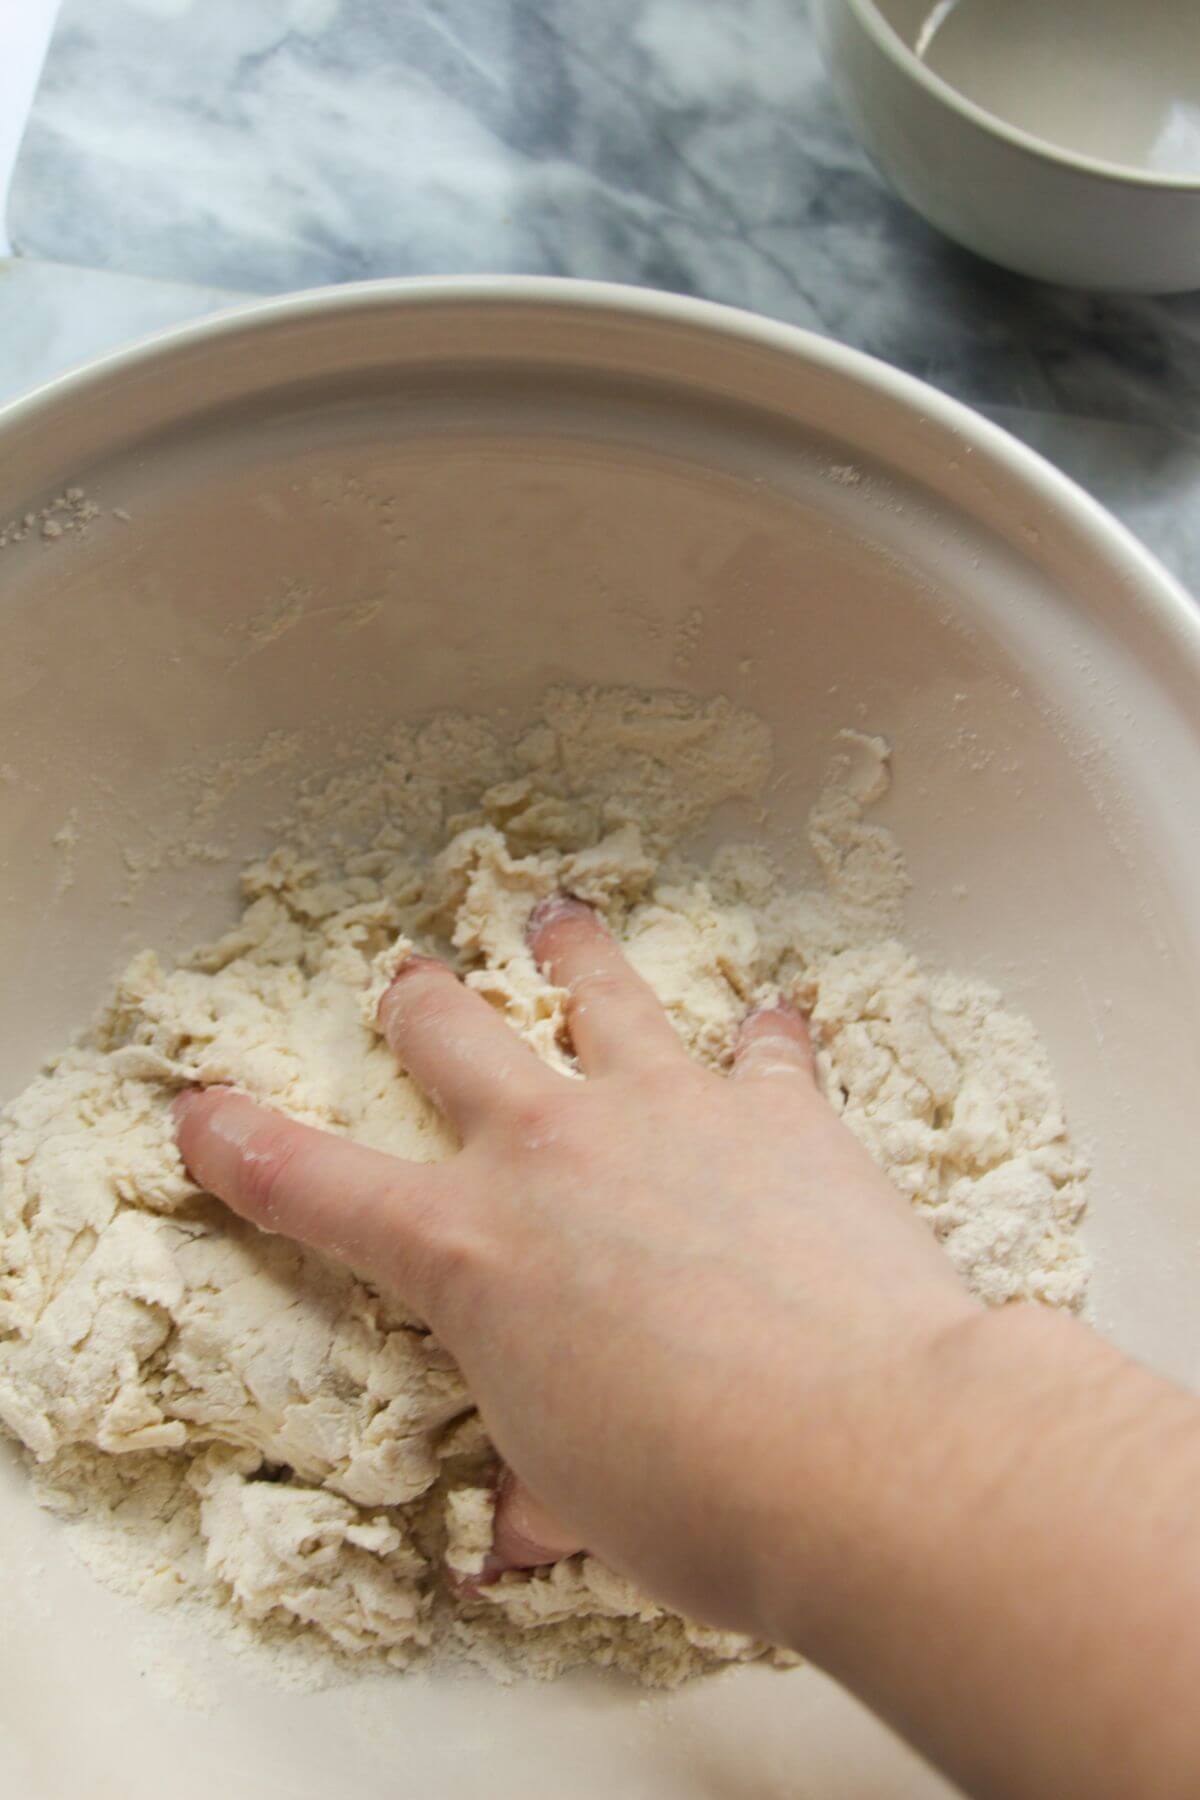 A hand squeezing flour and yogurt dough together in a large ceramic bowl.